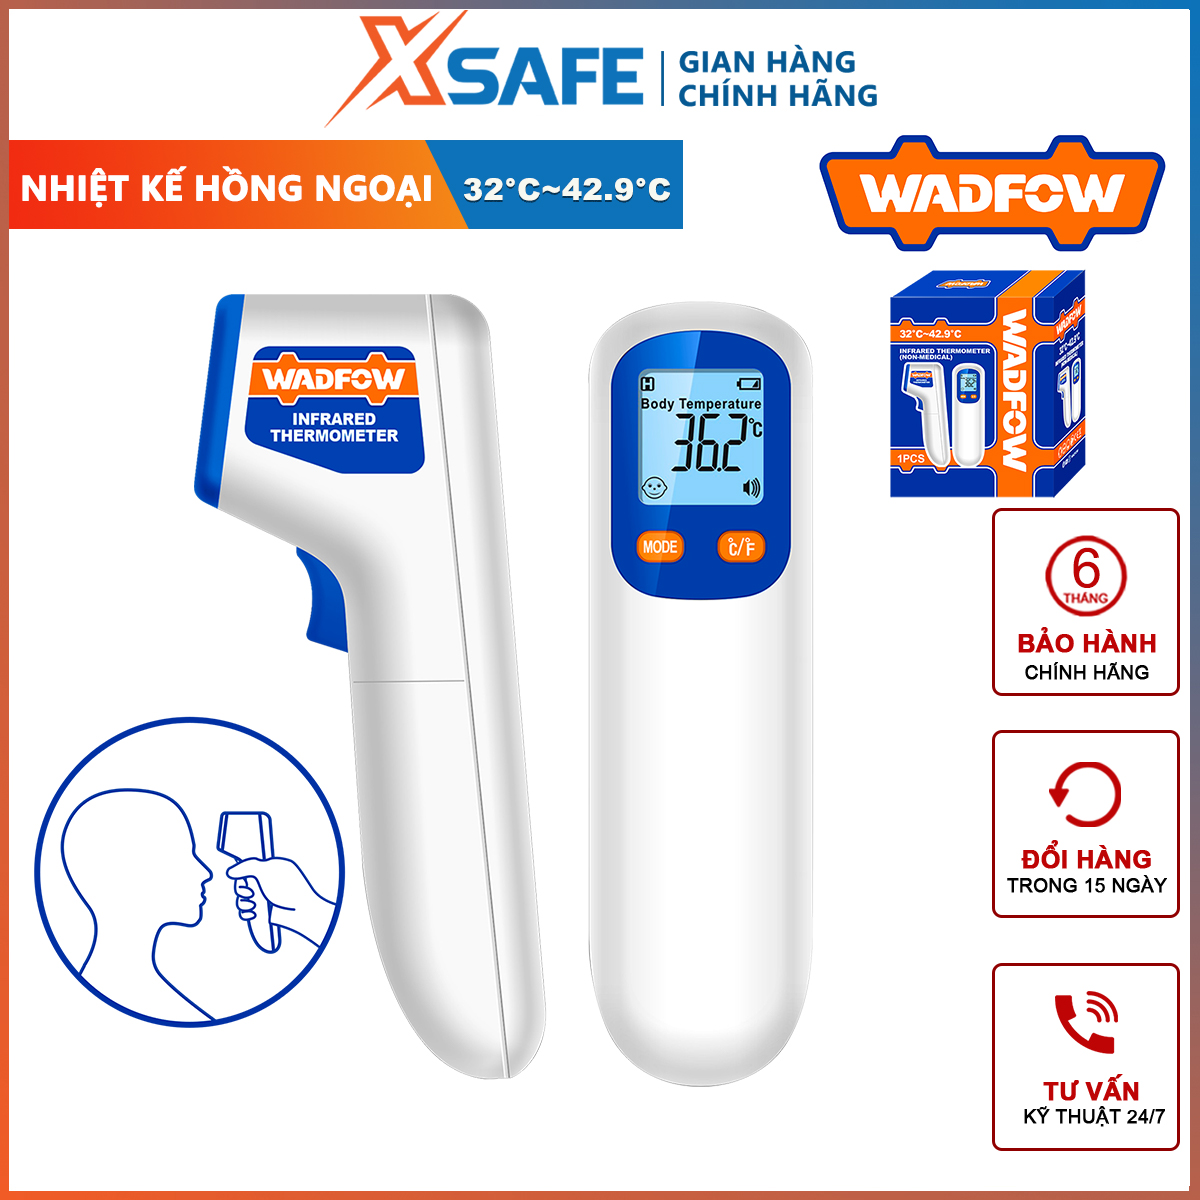 Wasfow wnt2501 infrared thermometer temperature measurement